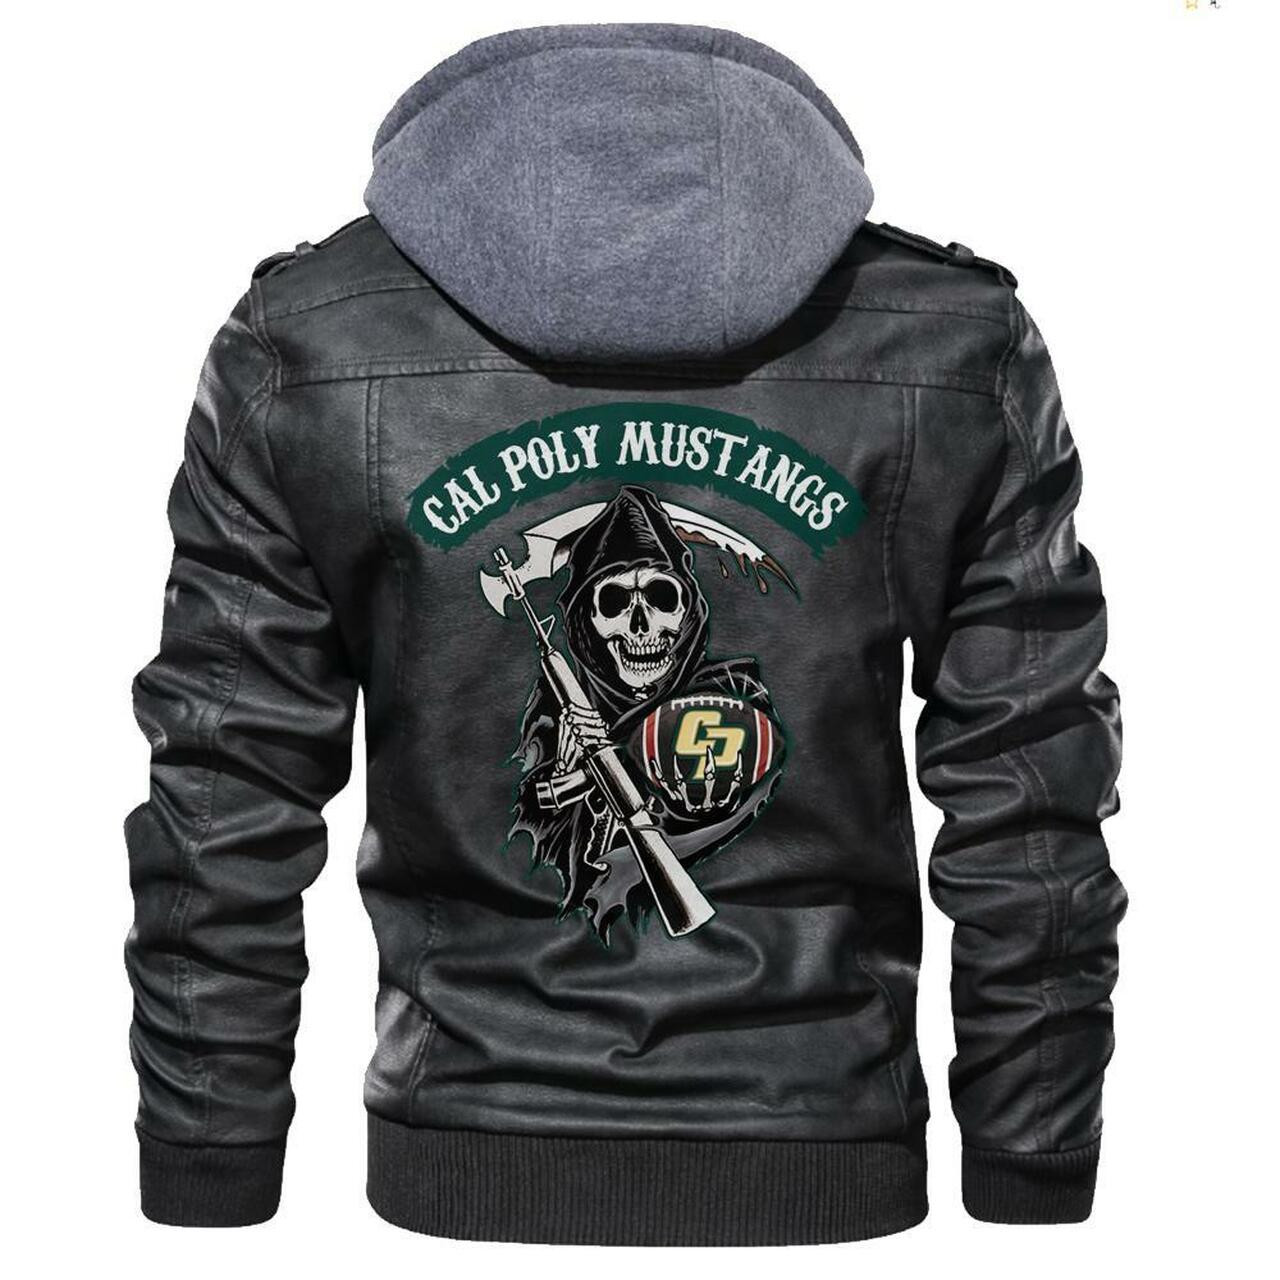 You can find Leather Jacket online at a great price 15